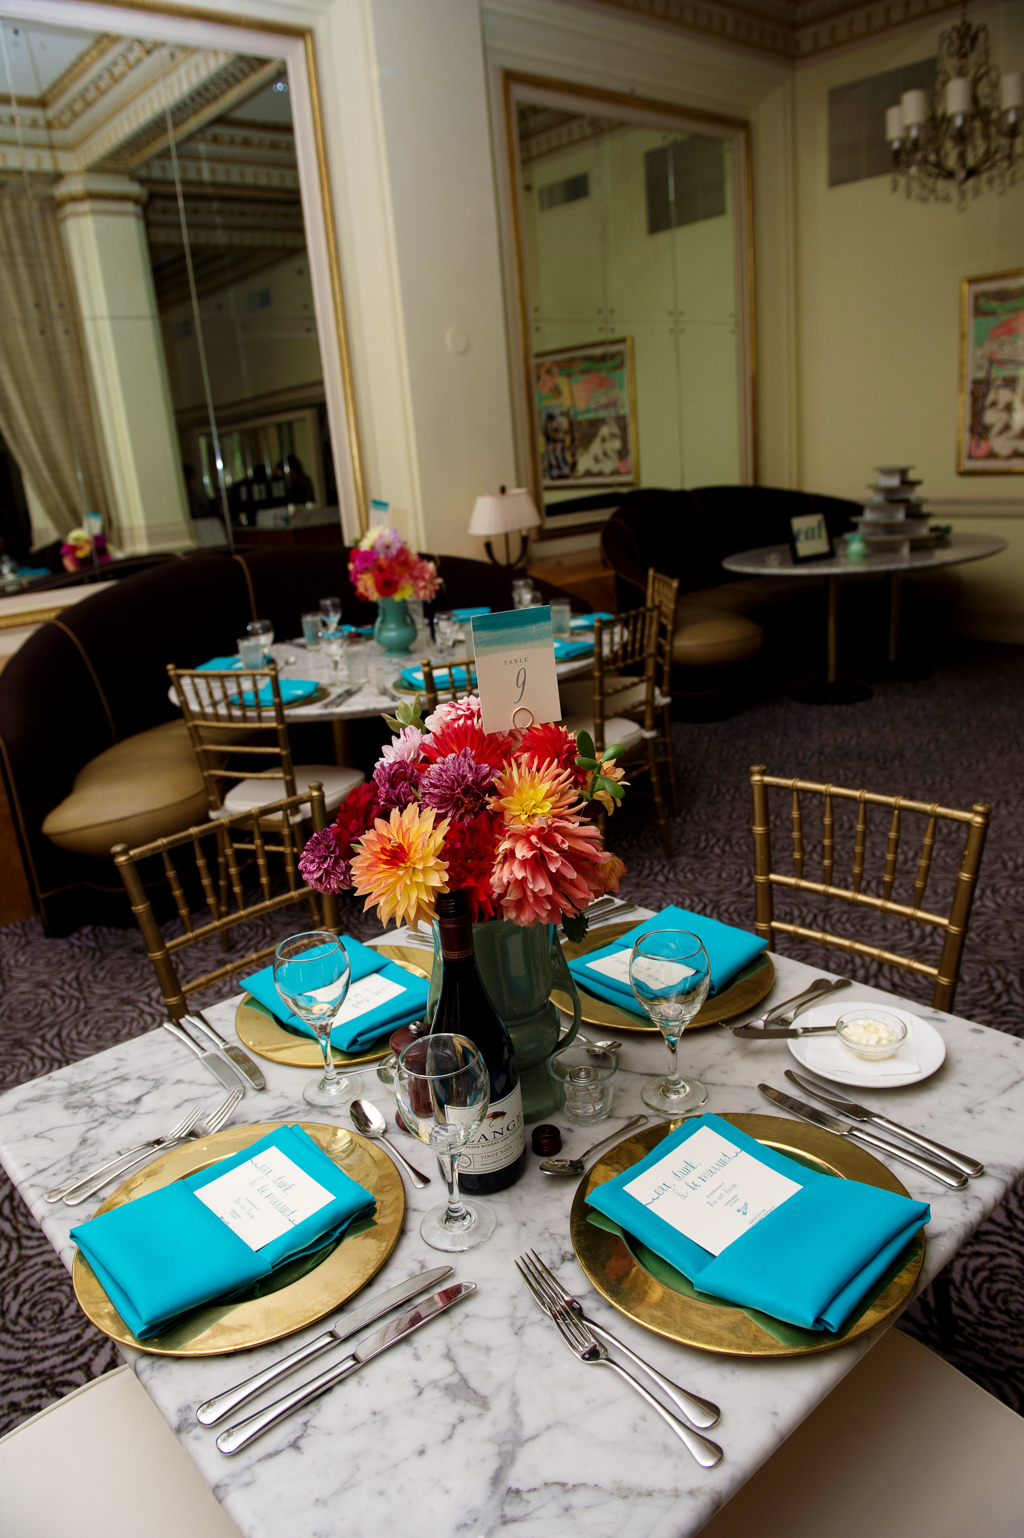 vintage teal vases hold yellow red and orange flowers at wedding reception at Gracies